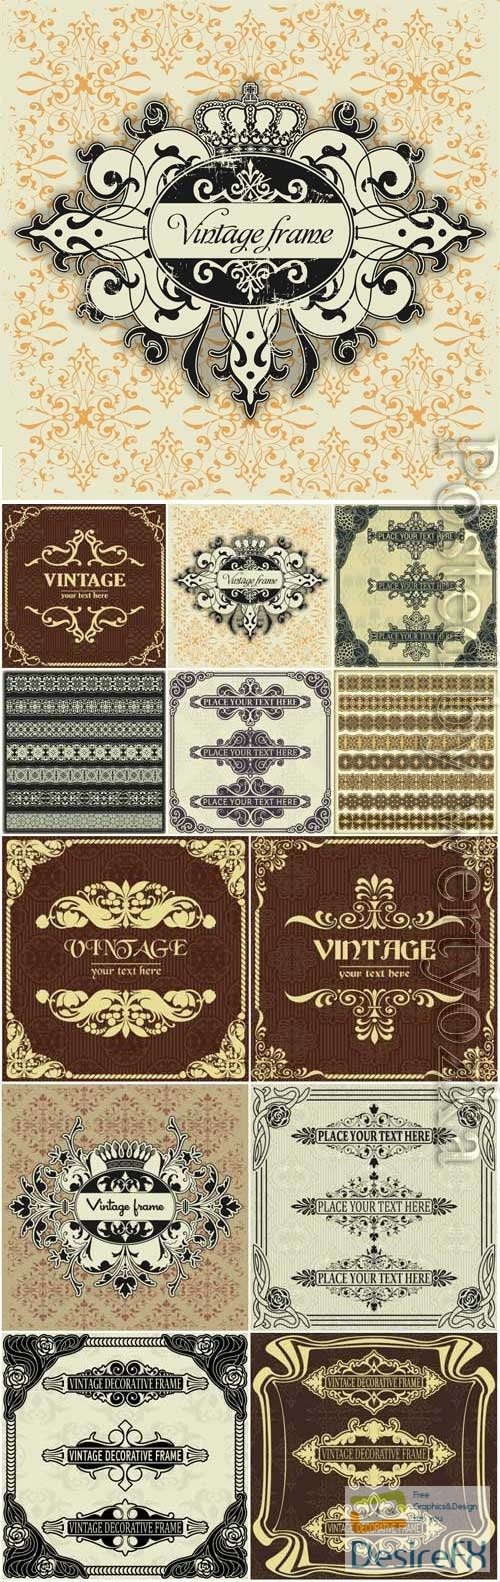 Frames and vintage backgrounds in vector